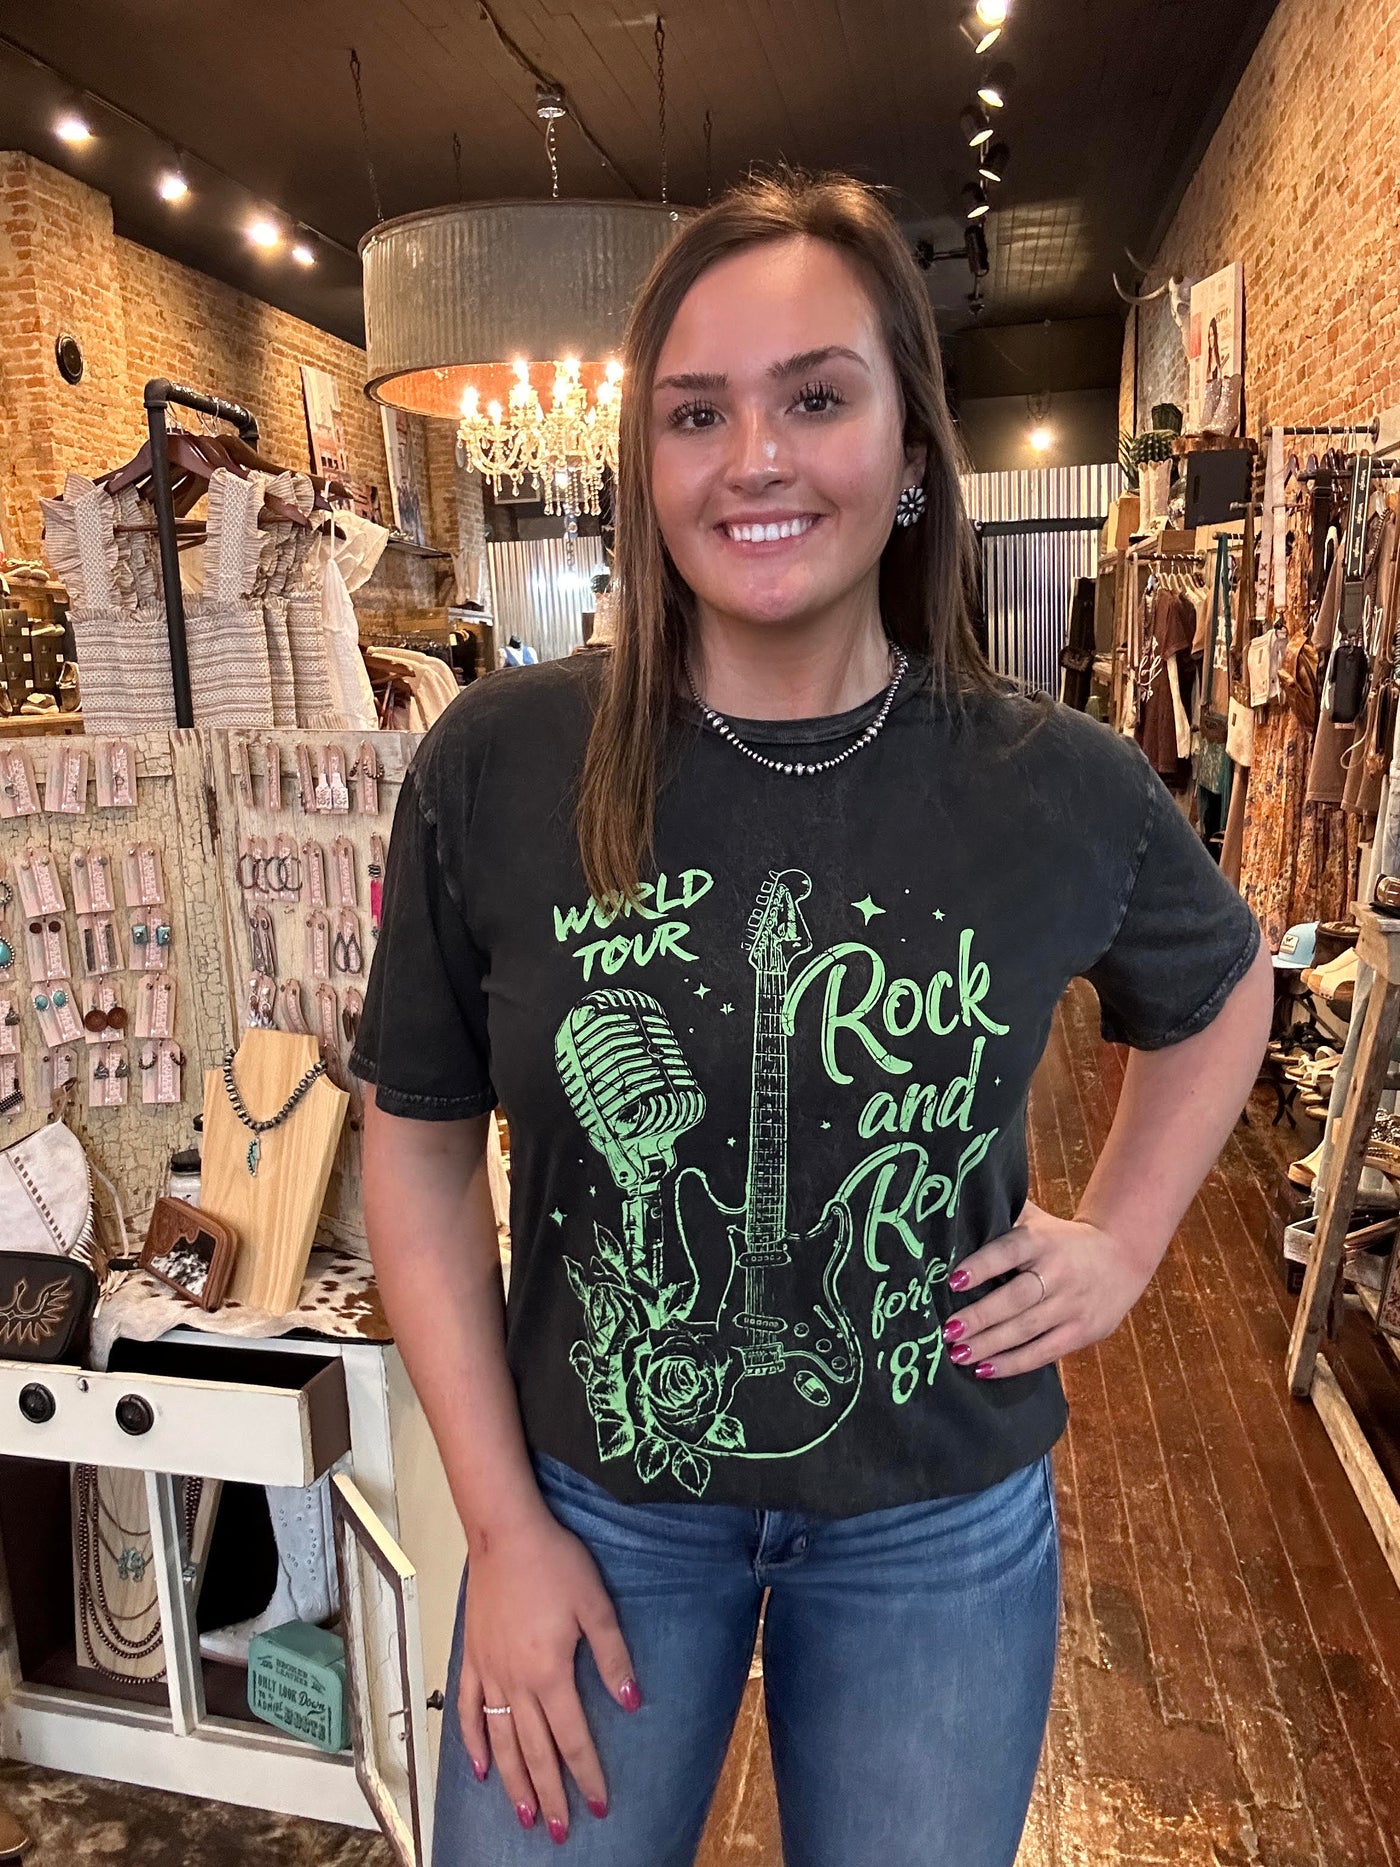 Breanna Rock & Roll Graphic Tee